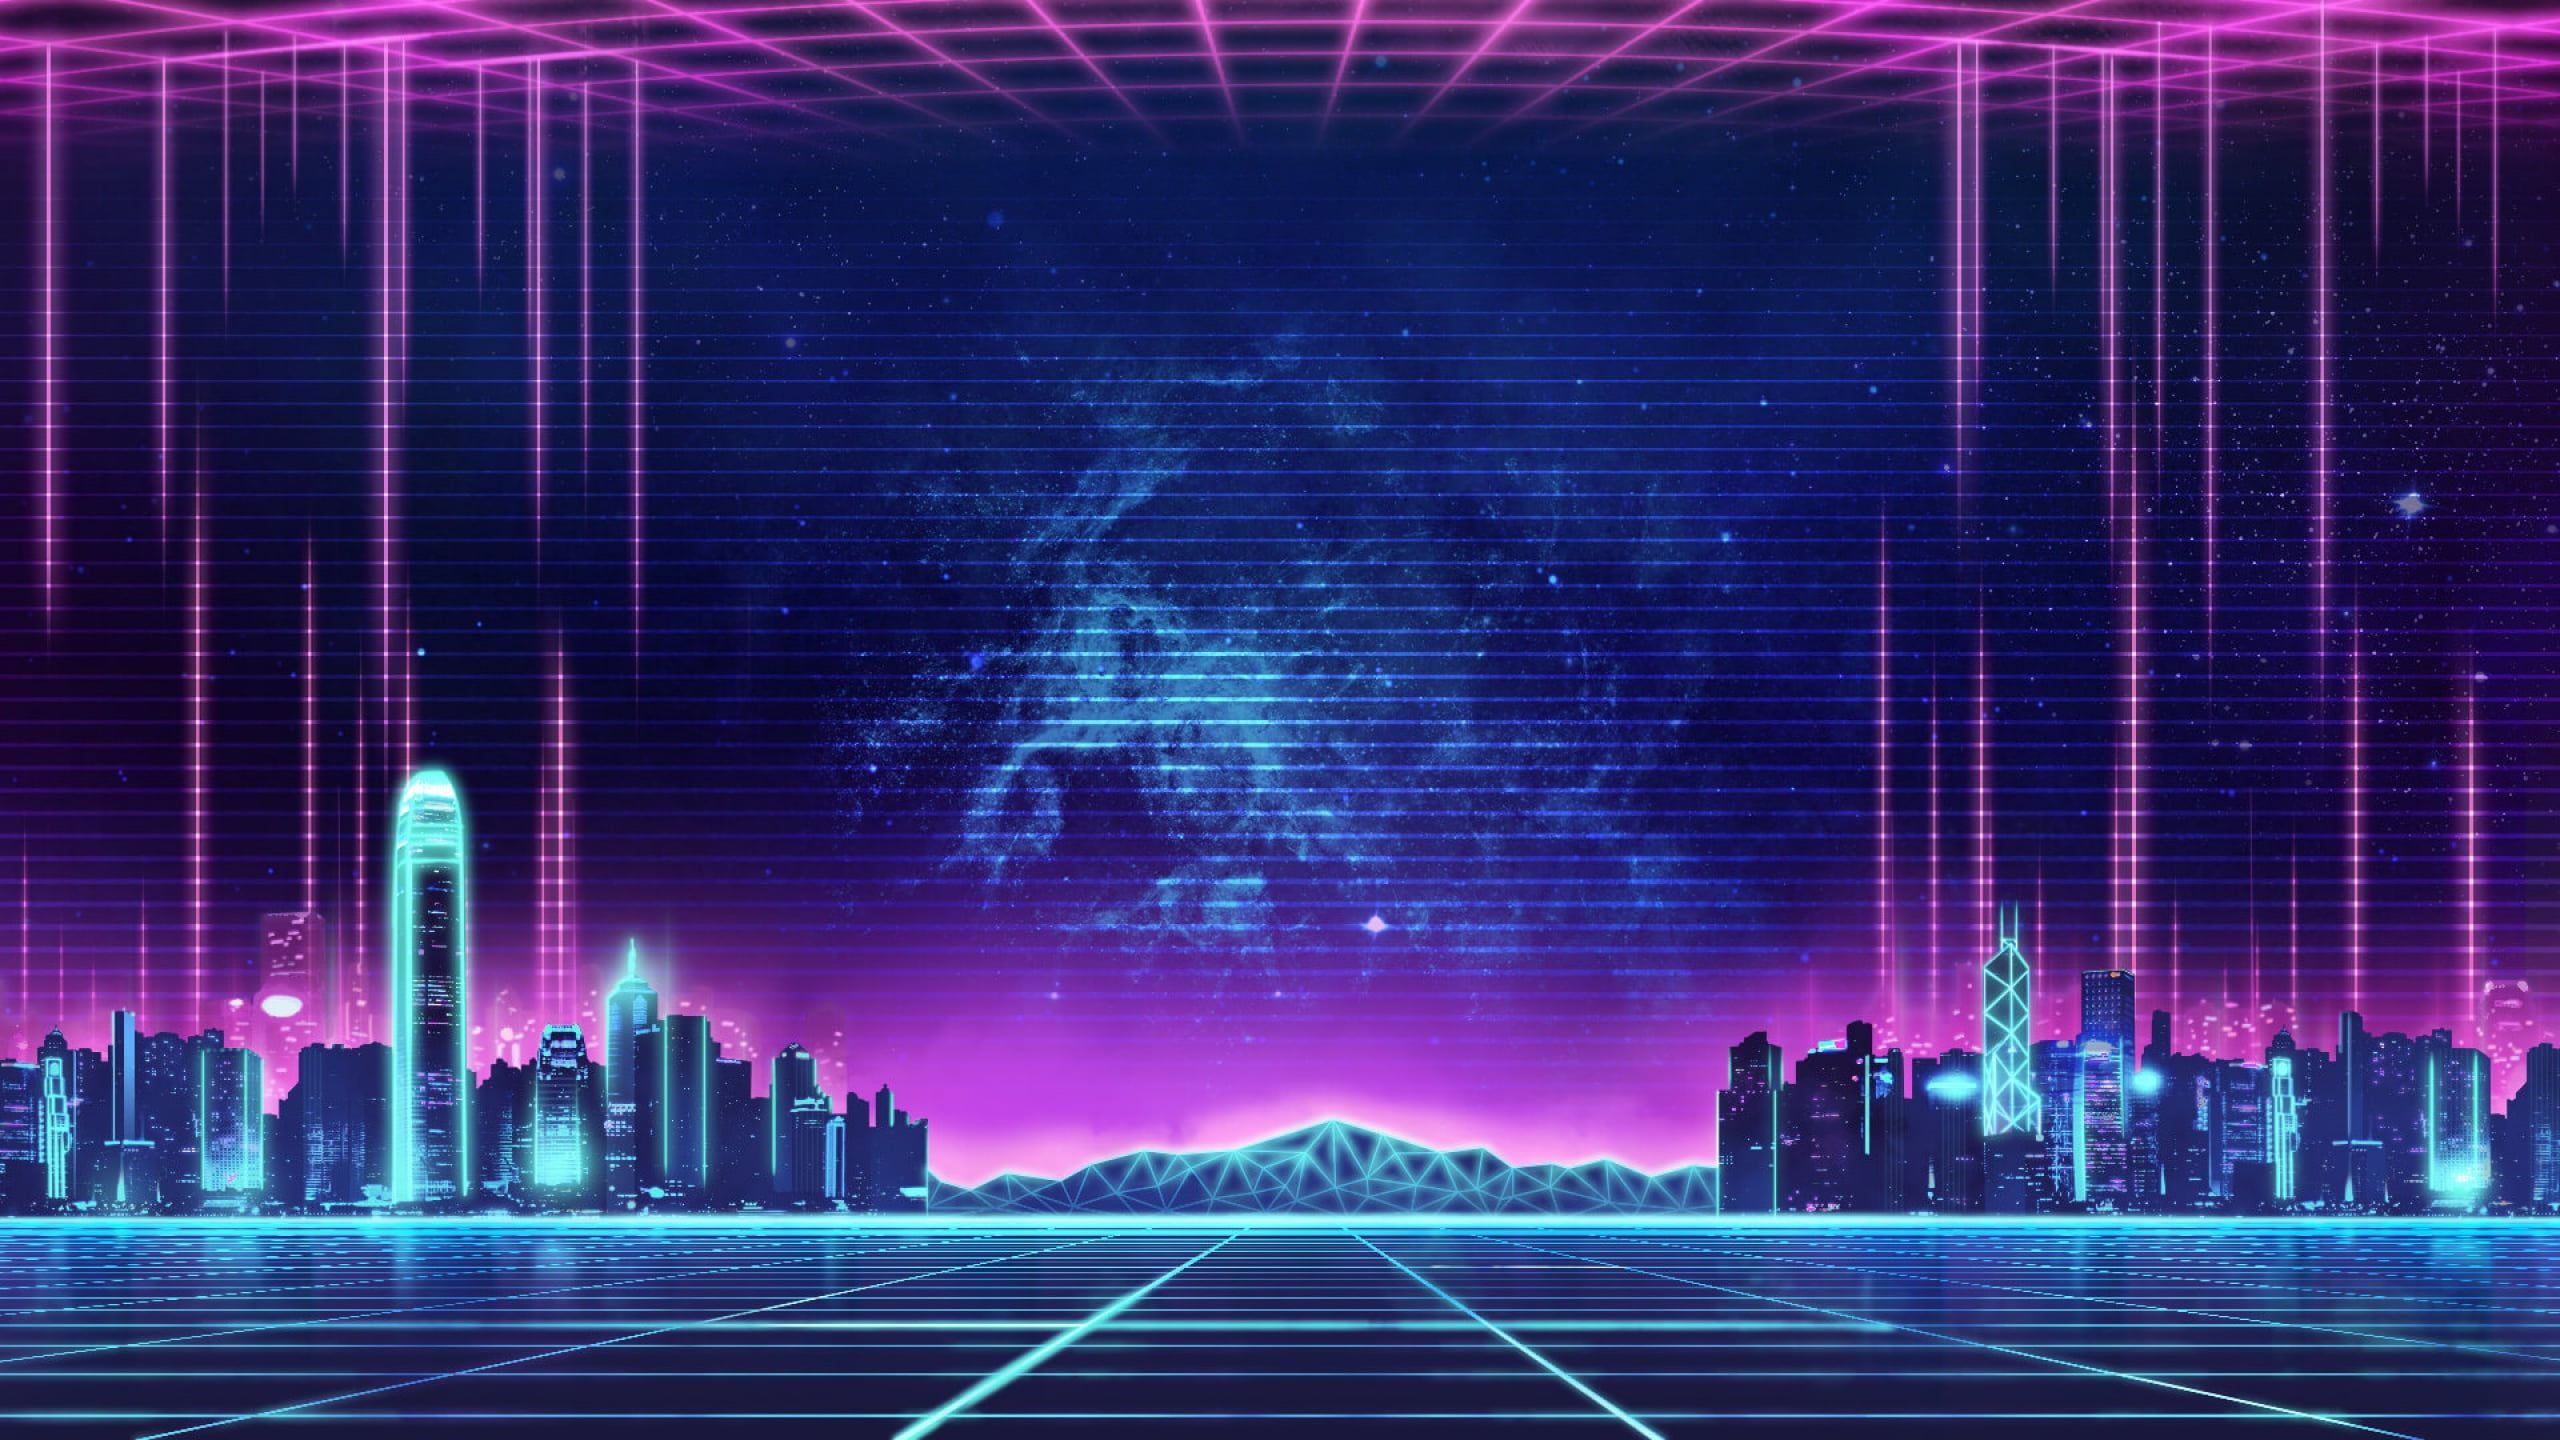 Music The city #Background #City s #Neon 's #Synth #Retrowave #Synthwave New Retro Wave #Futuresynth #Sintav. Neon wallpaper, City wallpaper, Retro waves